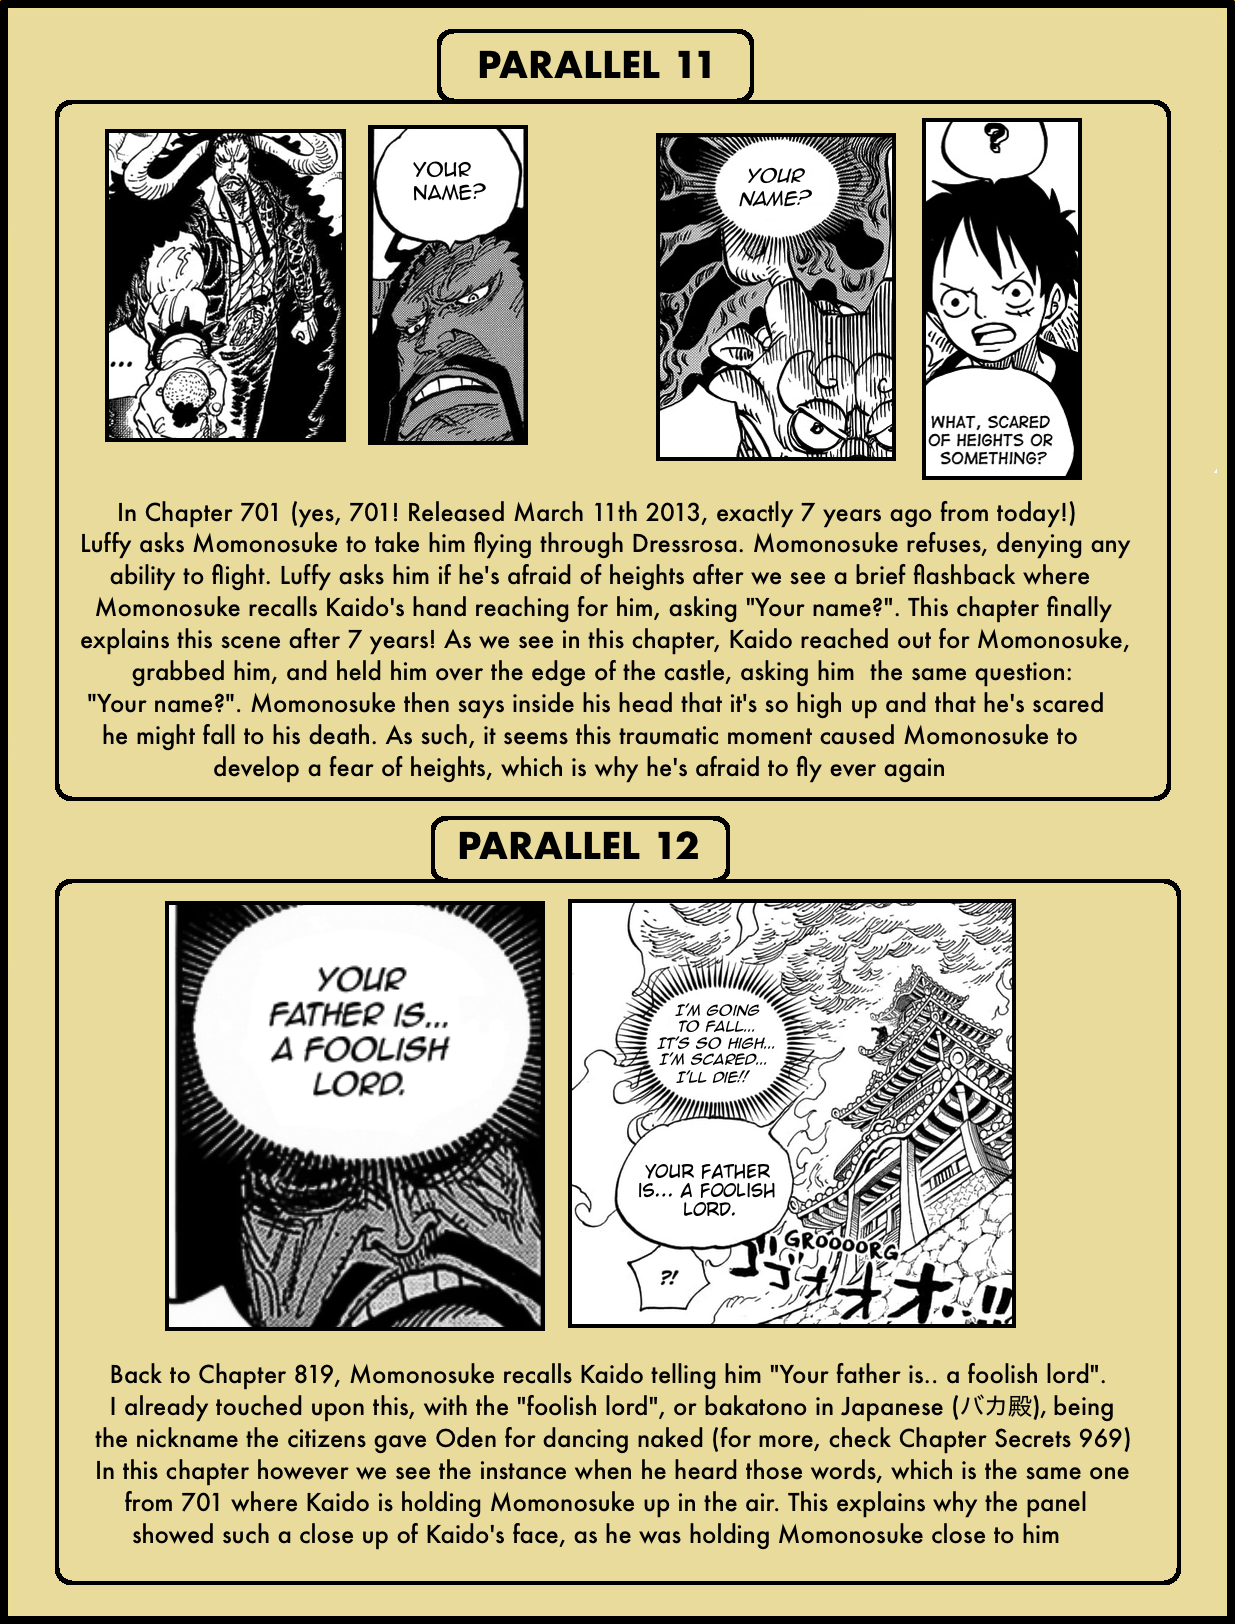 Chapter Secrets Chapter 973 In Depth Analysis The Library Of Ohara